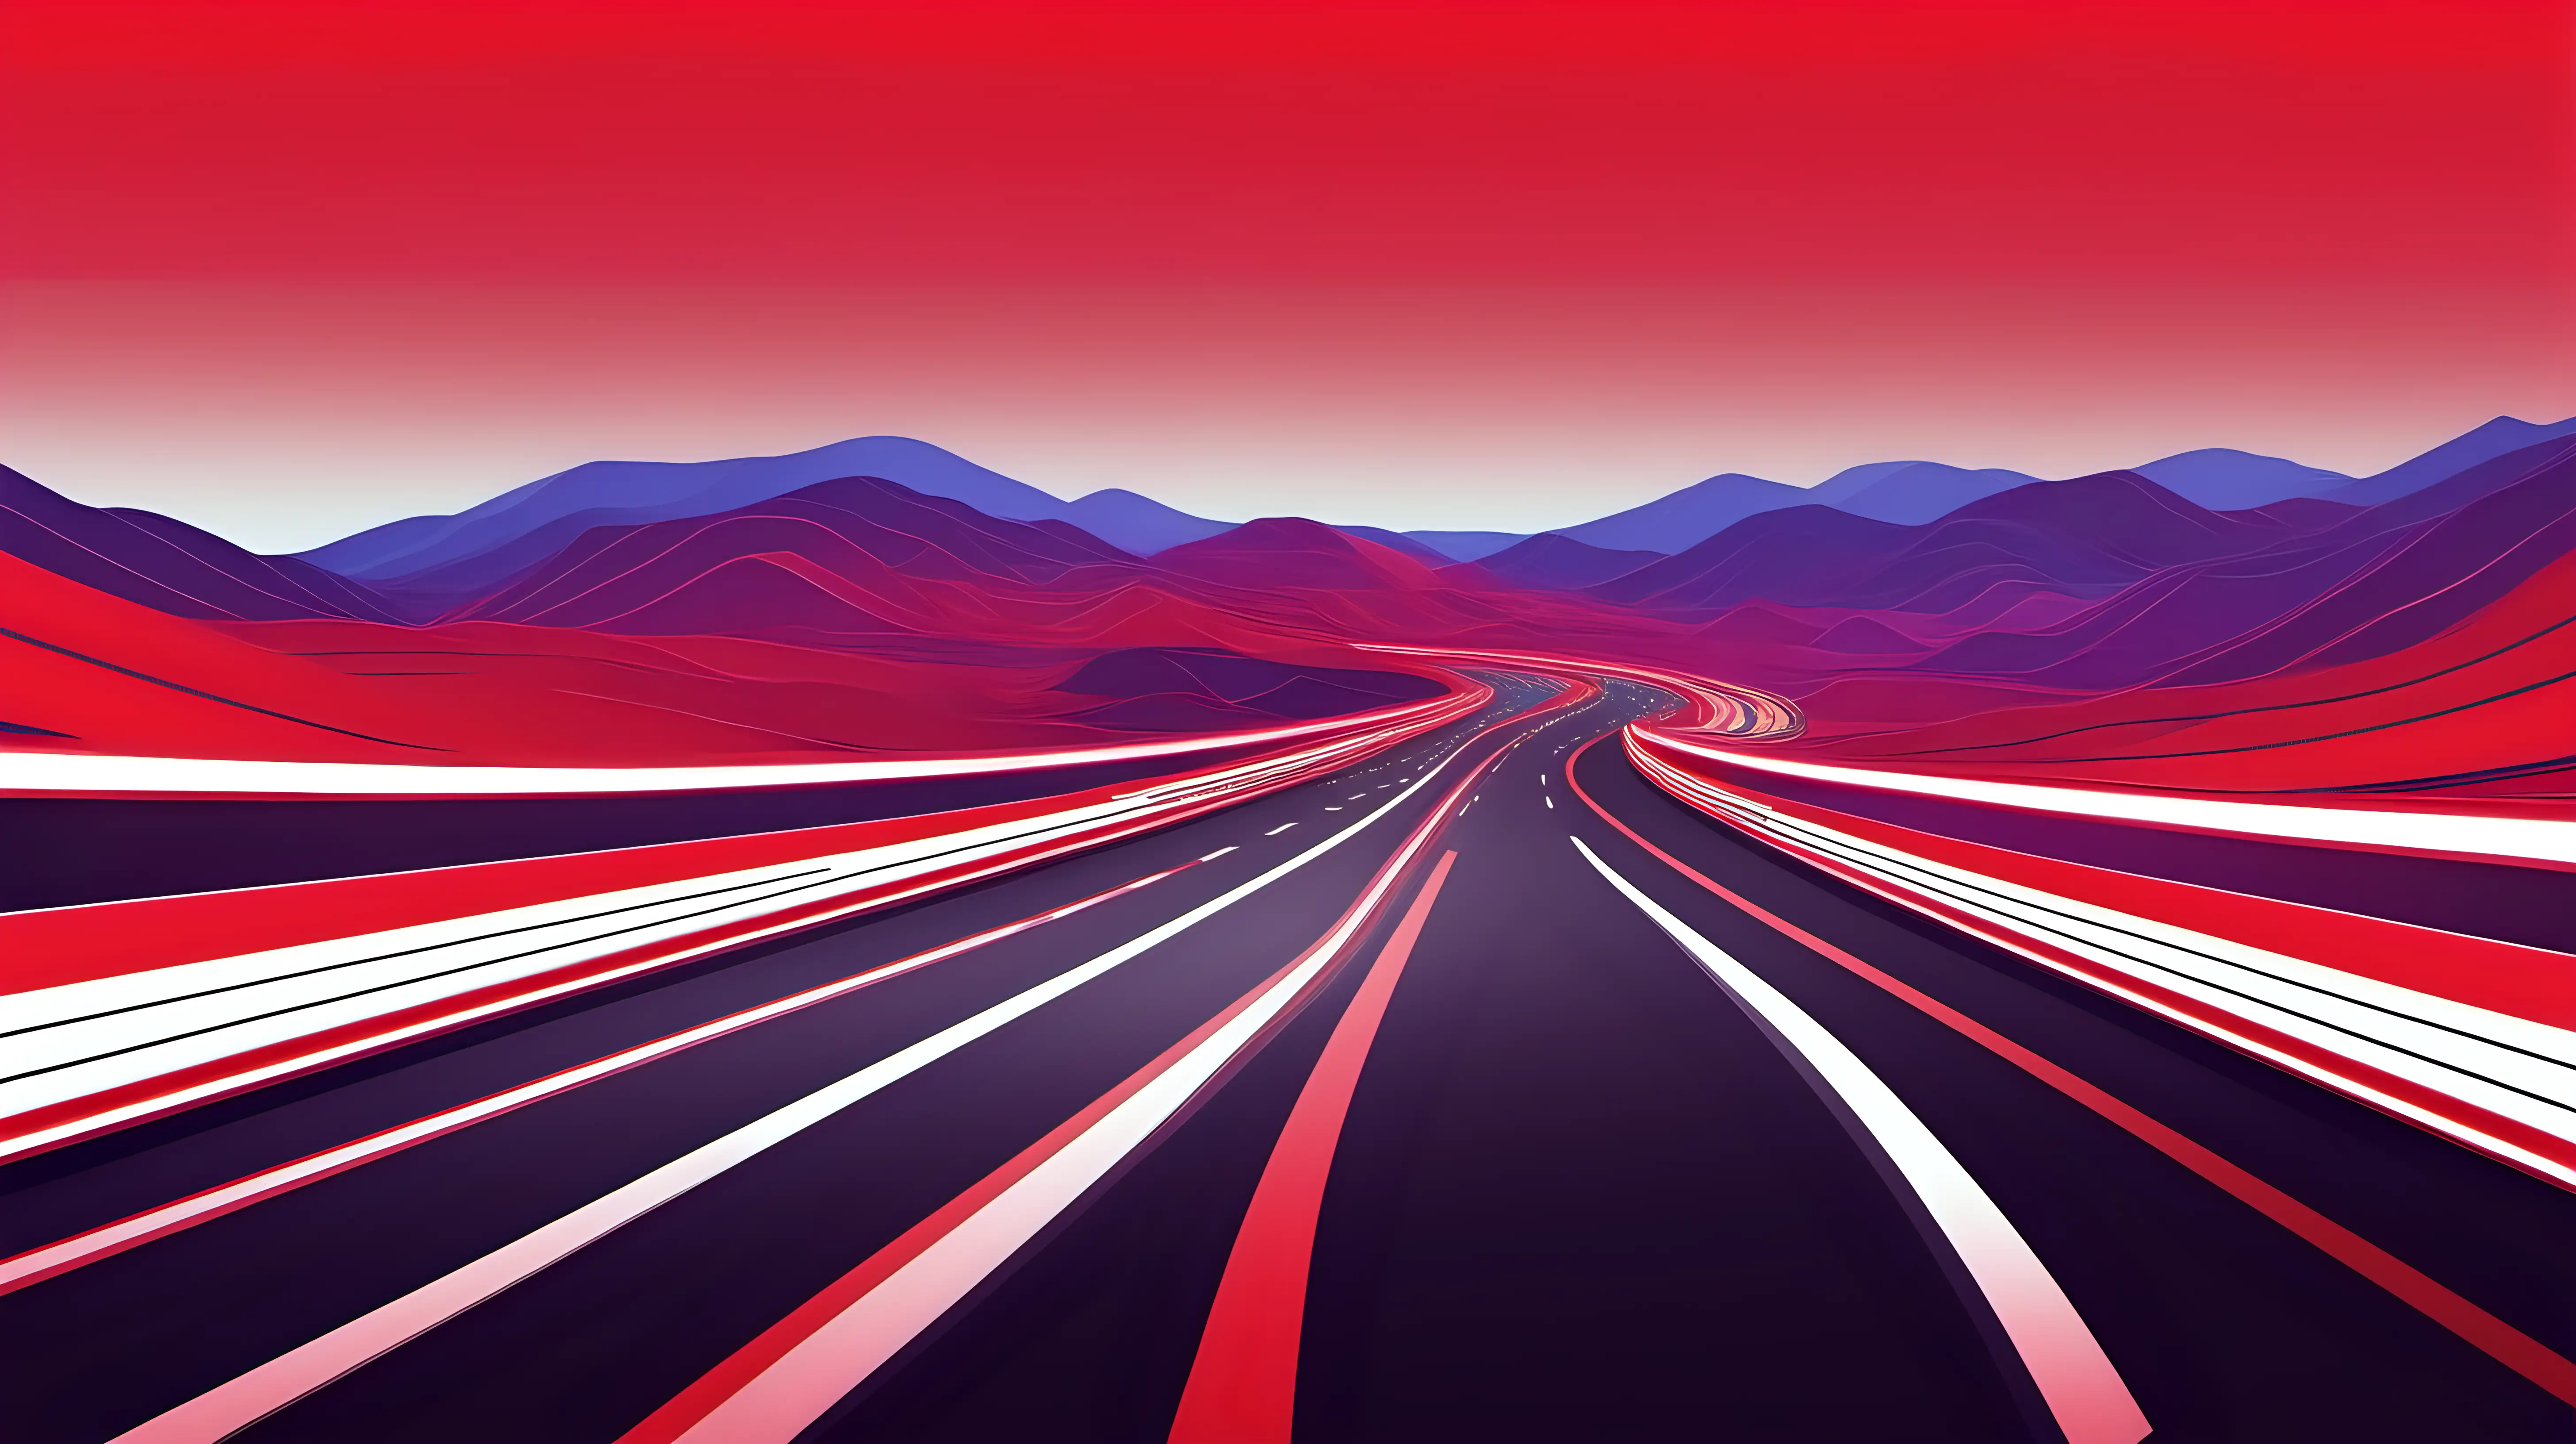 Vibrant Expressway Dynamic Red Strips on Curving Roads